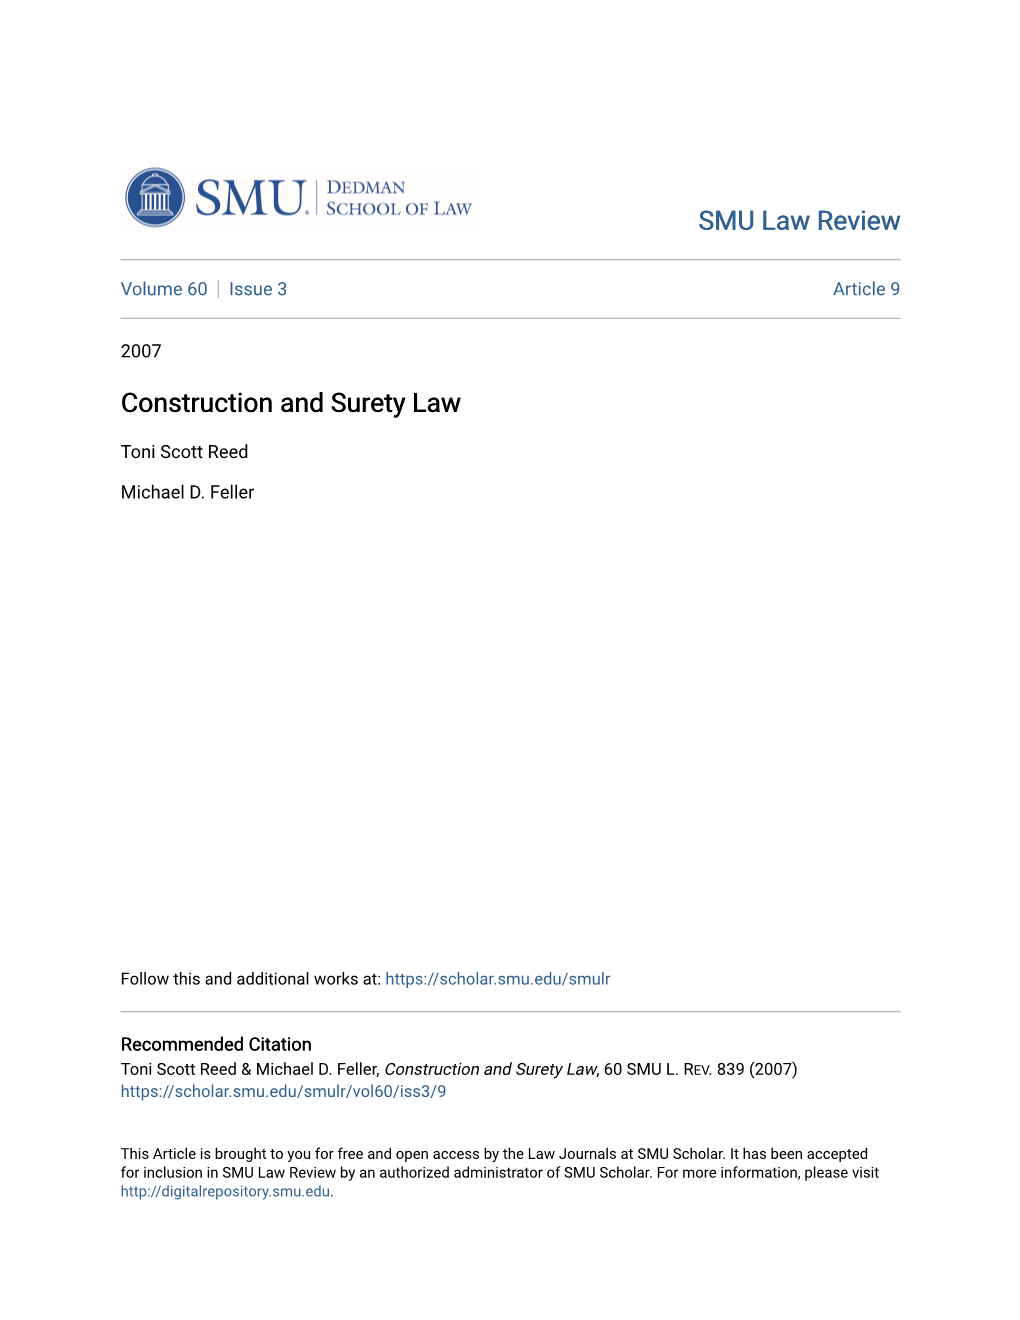 Construction and Surety Law